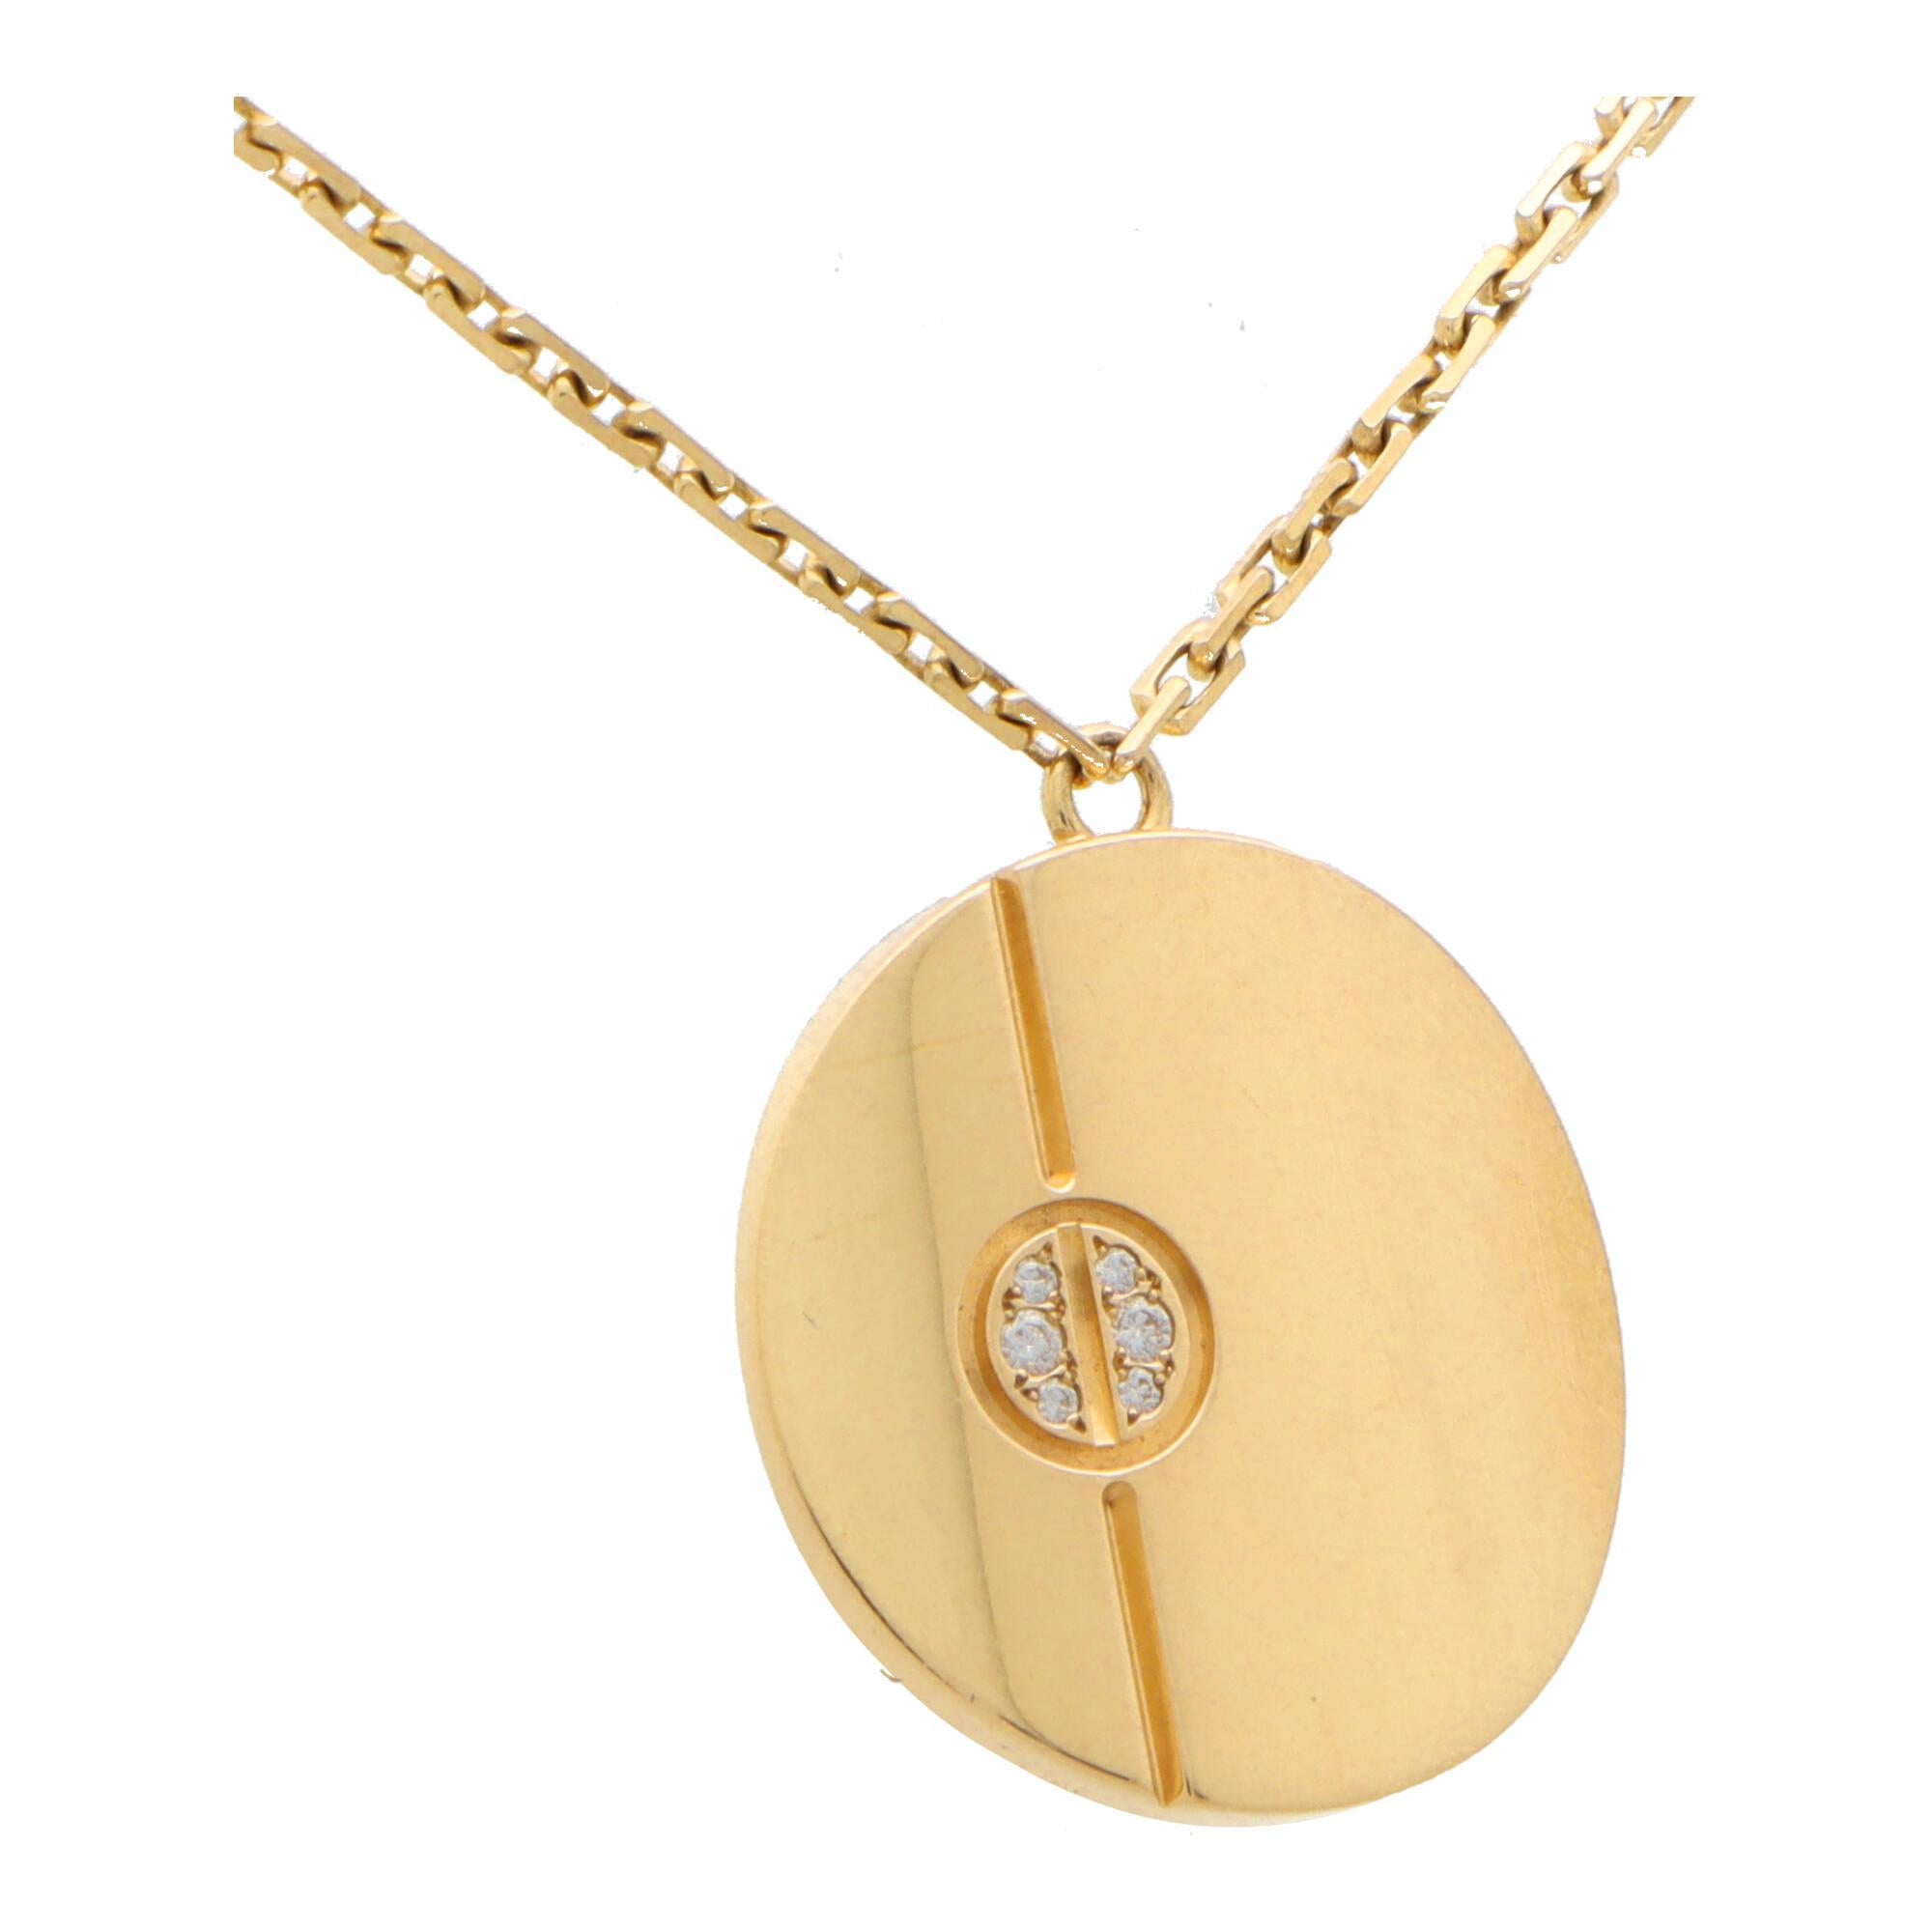 A beautiful vintage Cartier diamond Love set in 18k yellow gold.

The necklace is composed of a solid yellow gold disc set off centre with the iconic Cartier Love nail motif. The pendant hangs from a signed Cartier 18-inch chain which is included